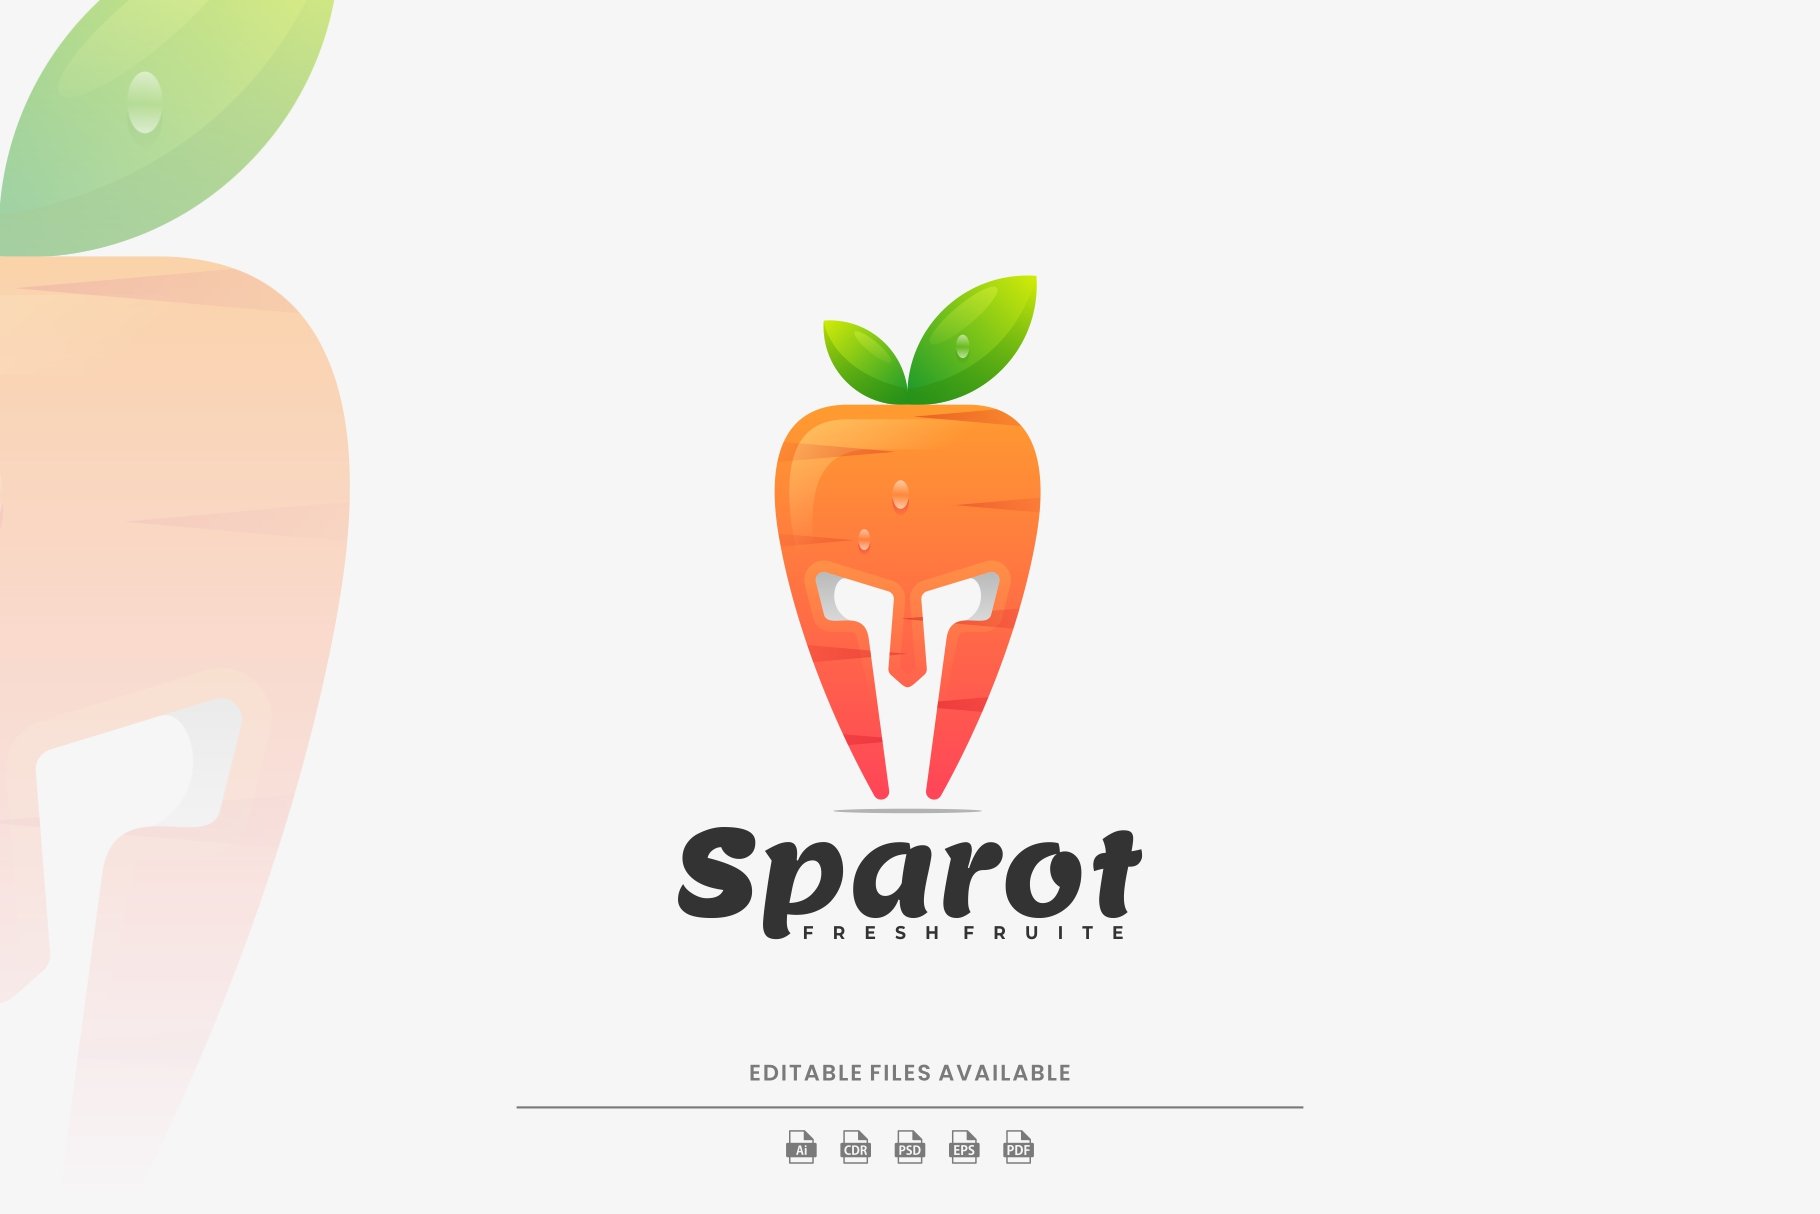 Spartan Carrot Dual Meaning Logo cover image.